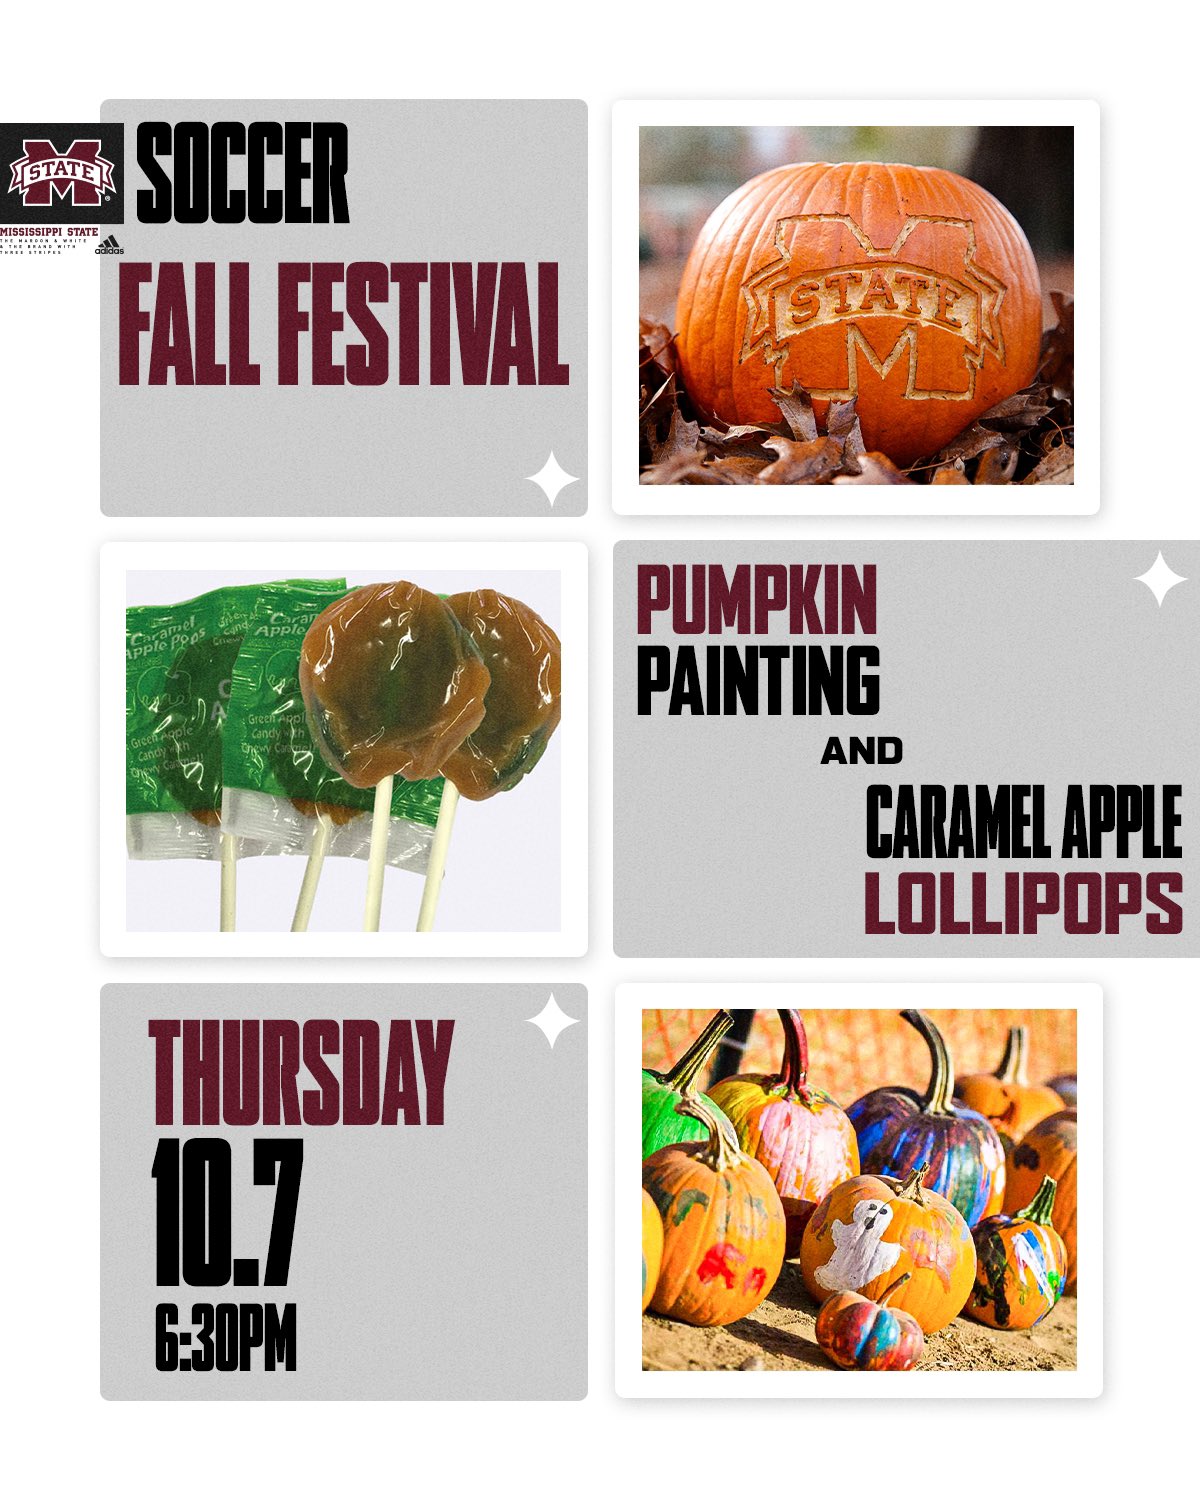 MSU Soccer Fall Festival graphic with images of painted and carved pumpkins and caramel apple lollipops